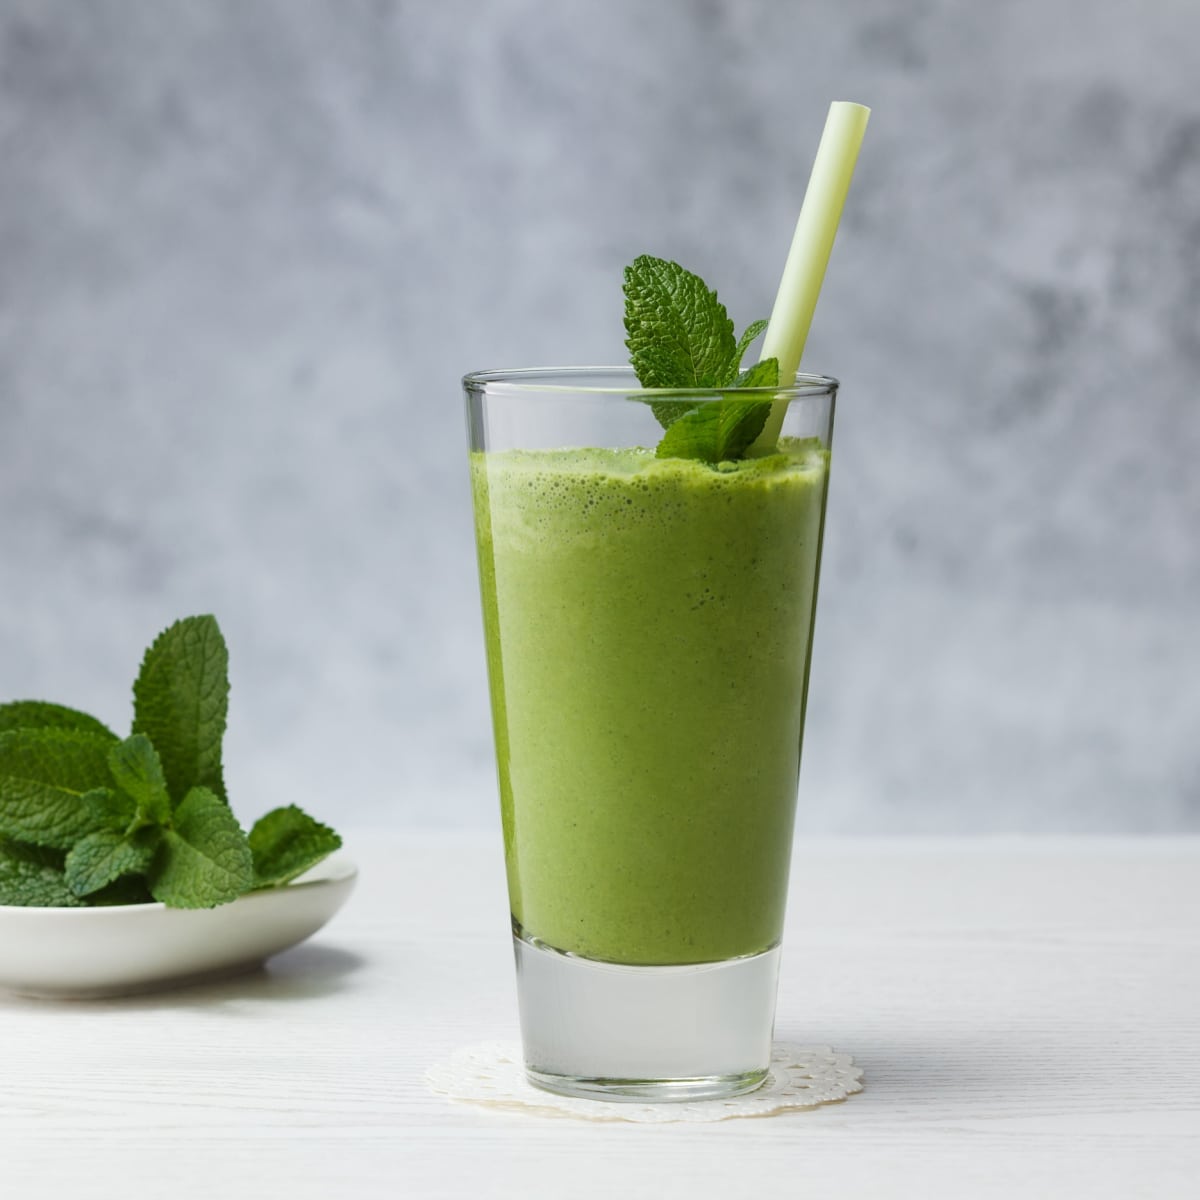 banana, avocado, spinach smoothie with fresh mint in clear glass